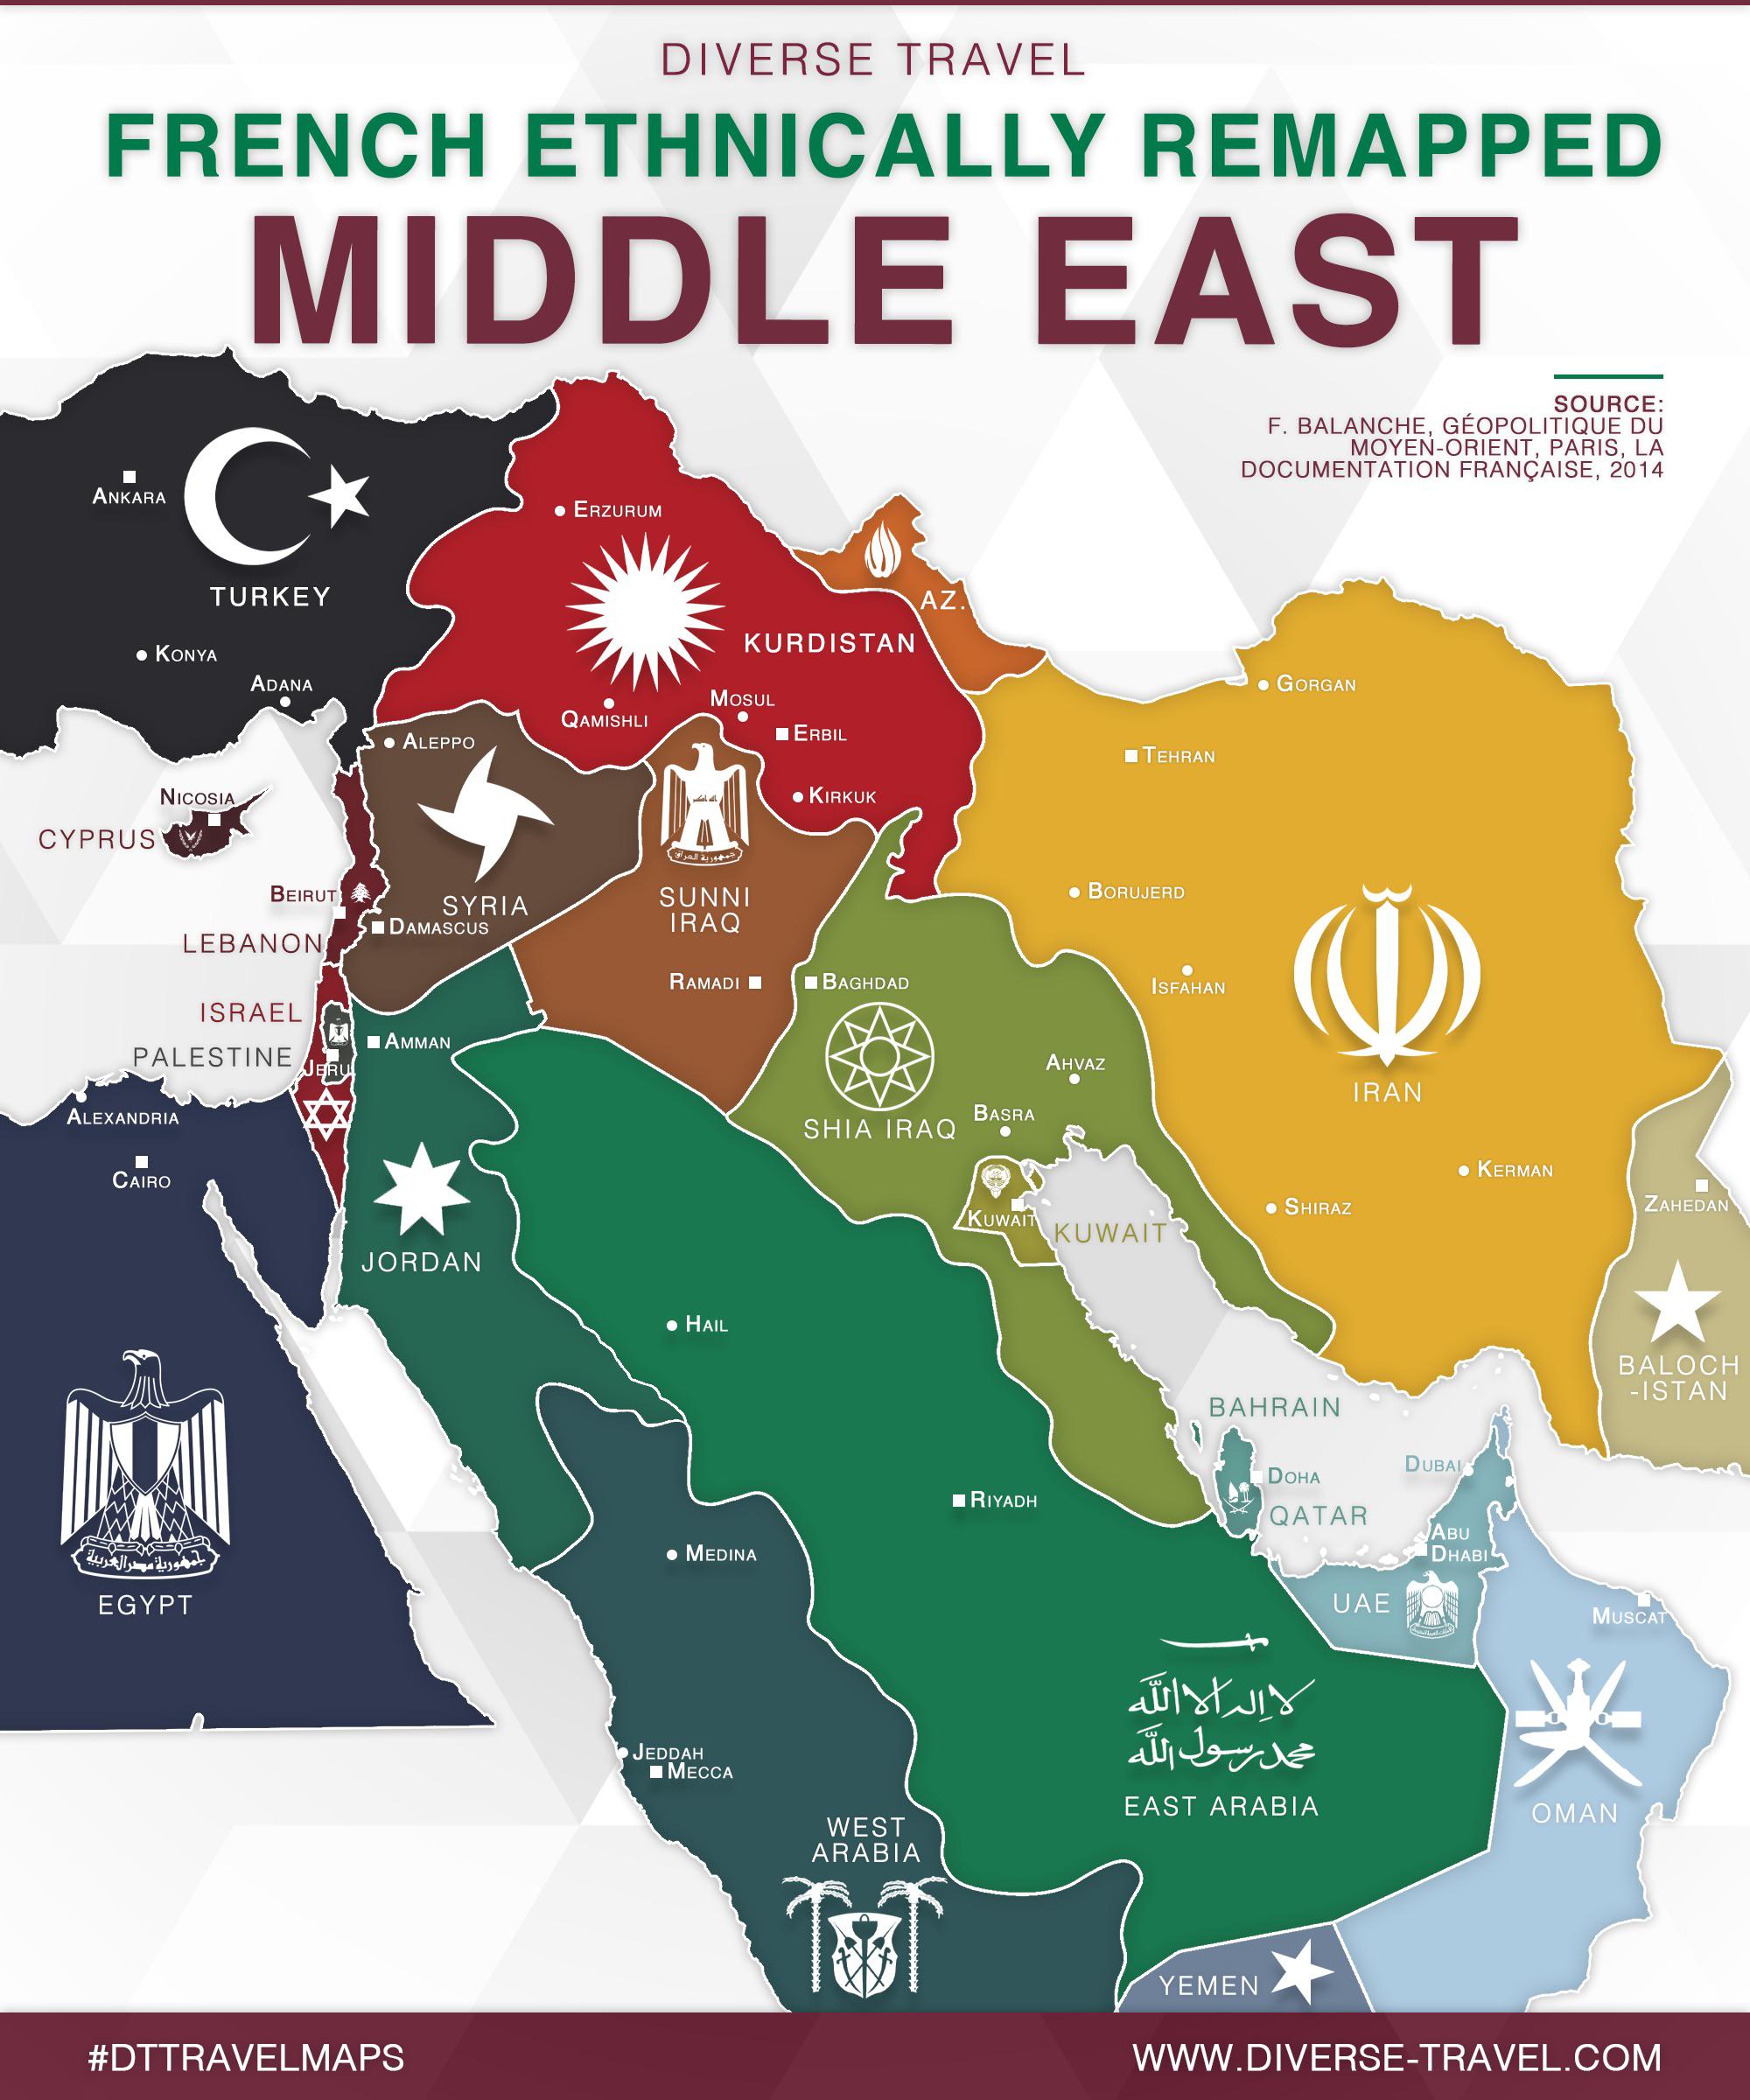 Middle East Remapped According To Ethnic & Confessional Criteria - A French  View [OC] : r/MapPorn